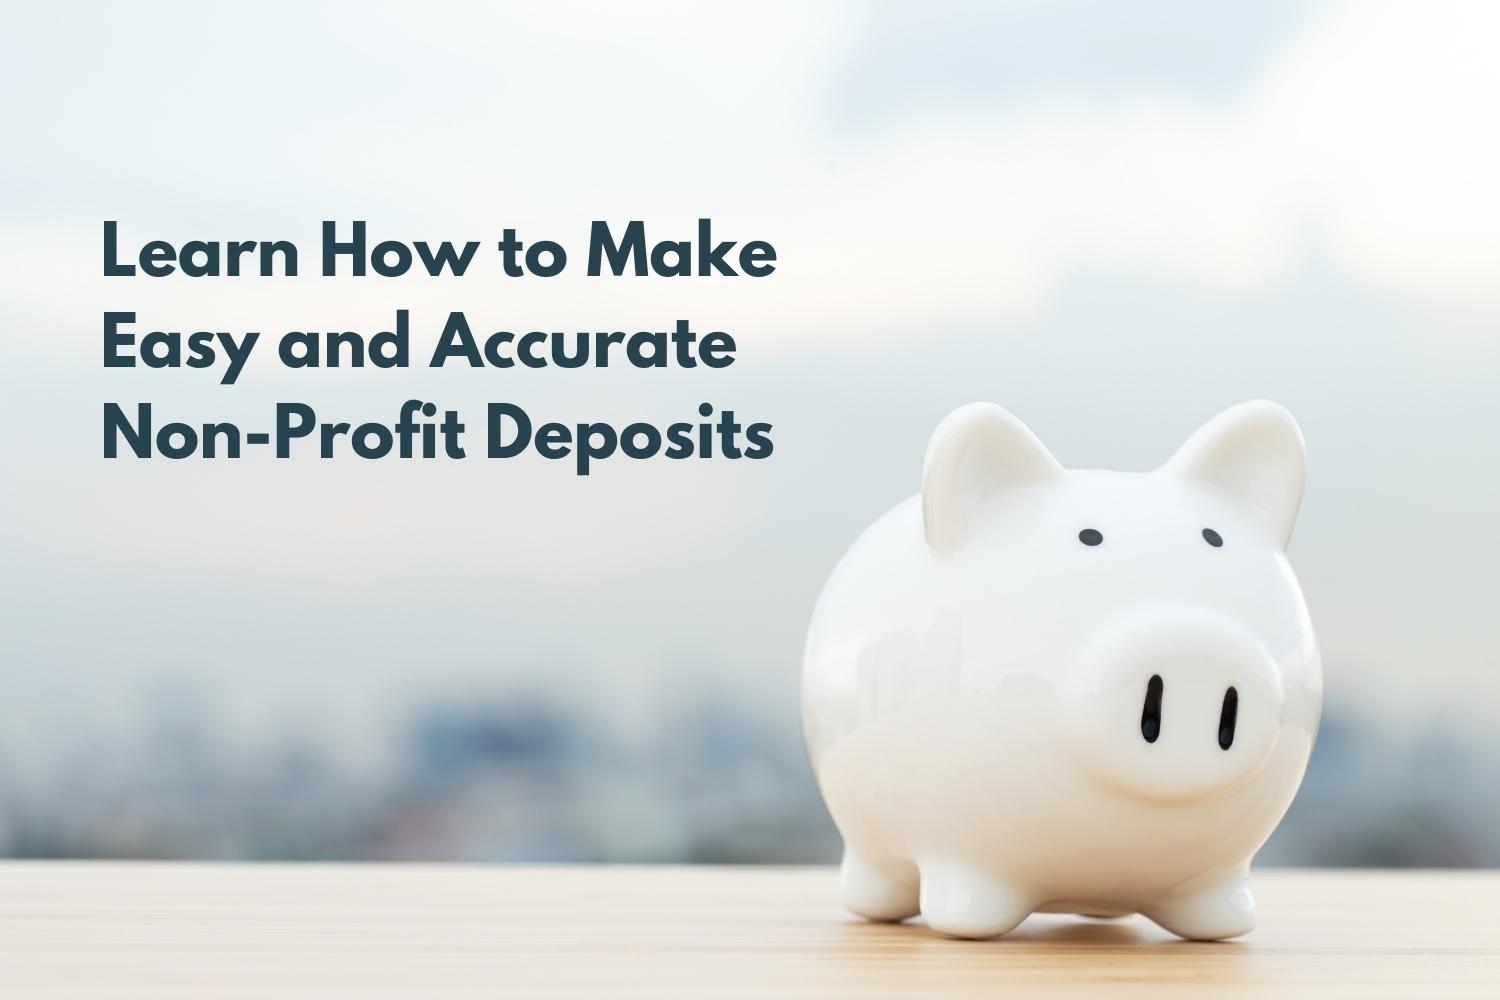 How to Make Non-Profit Deposits Easy and Accurate